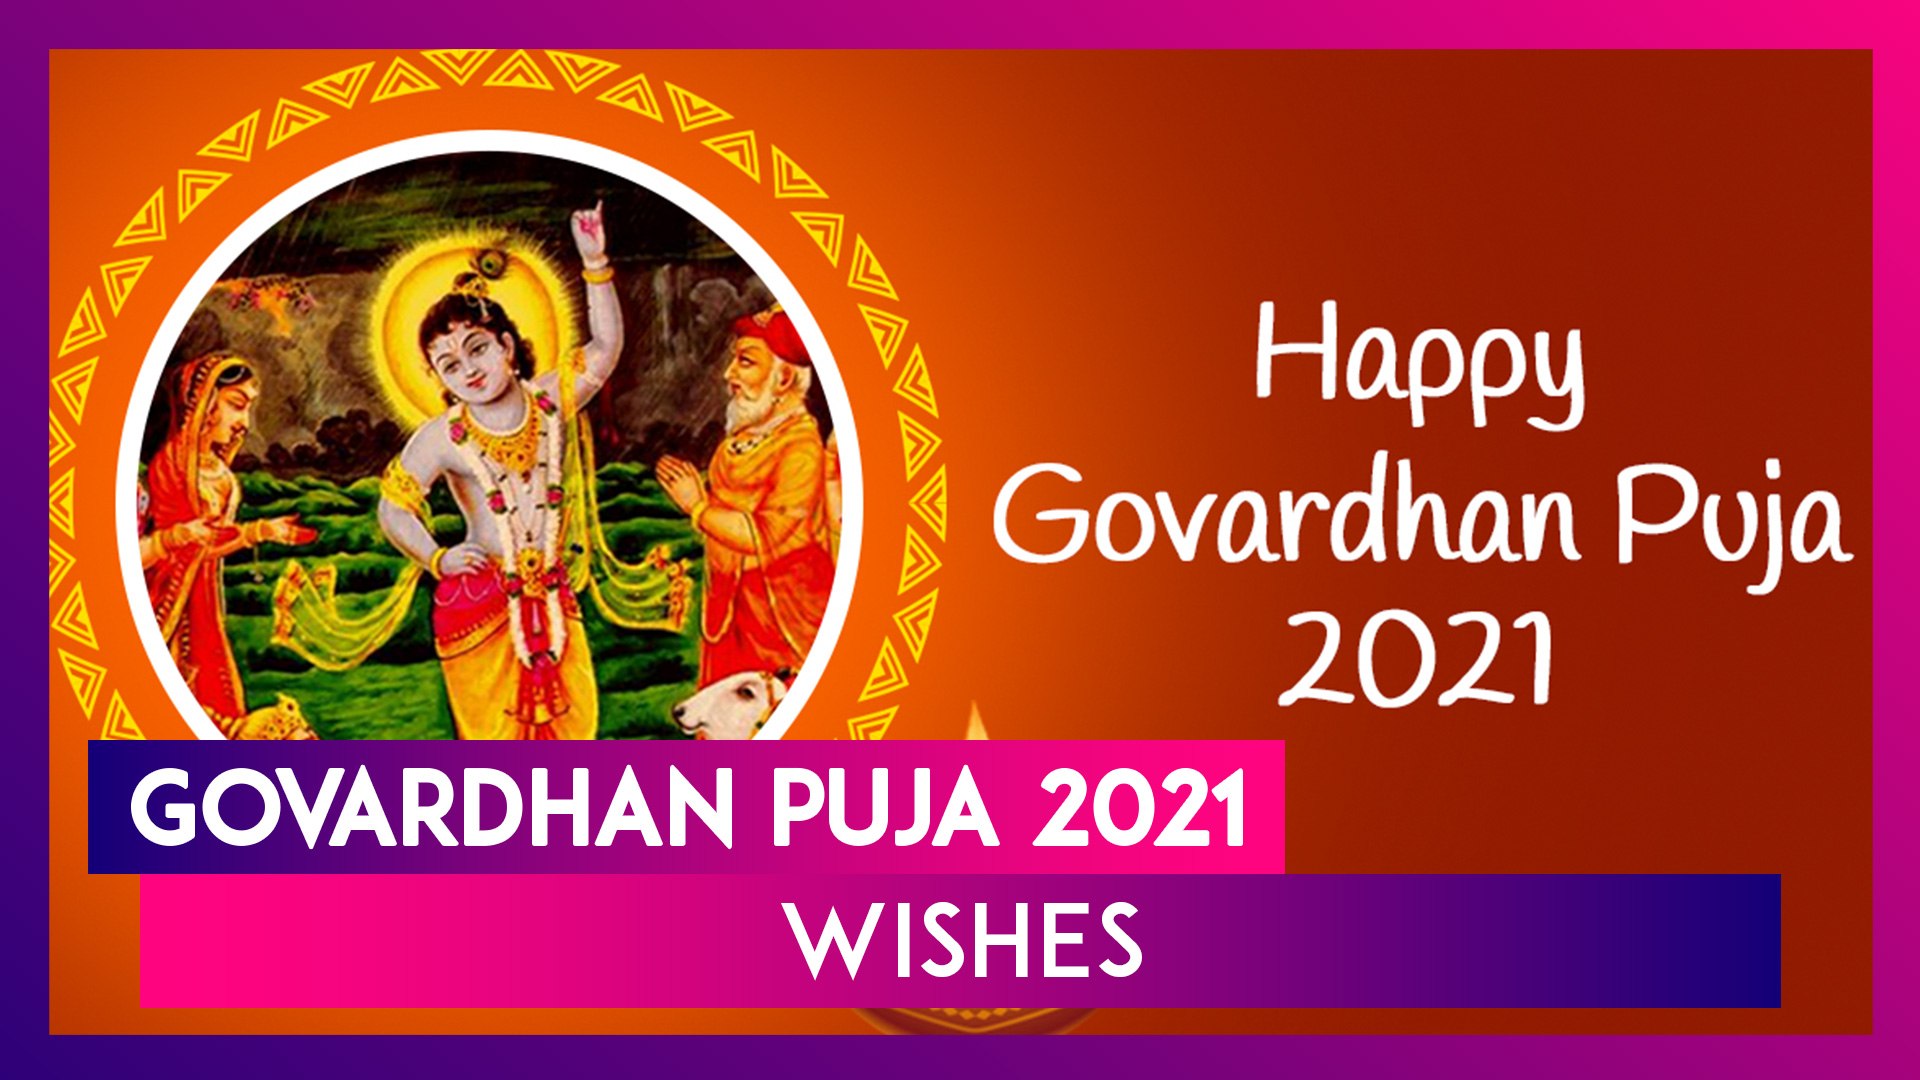 Govardhan Puja 2021 Wishes: Greetings And Messages to Share on The Day  After Diwali - video Dailymotion